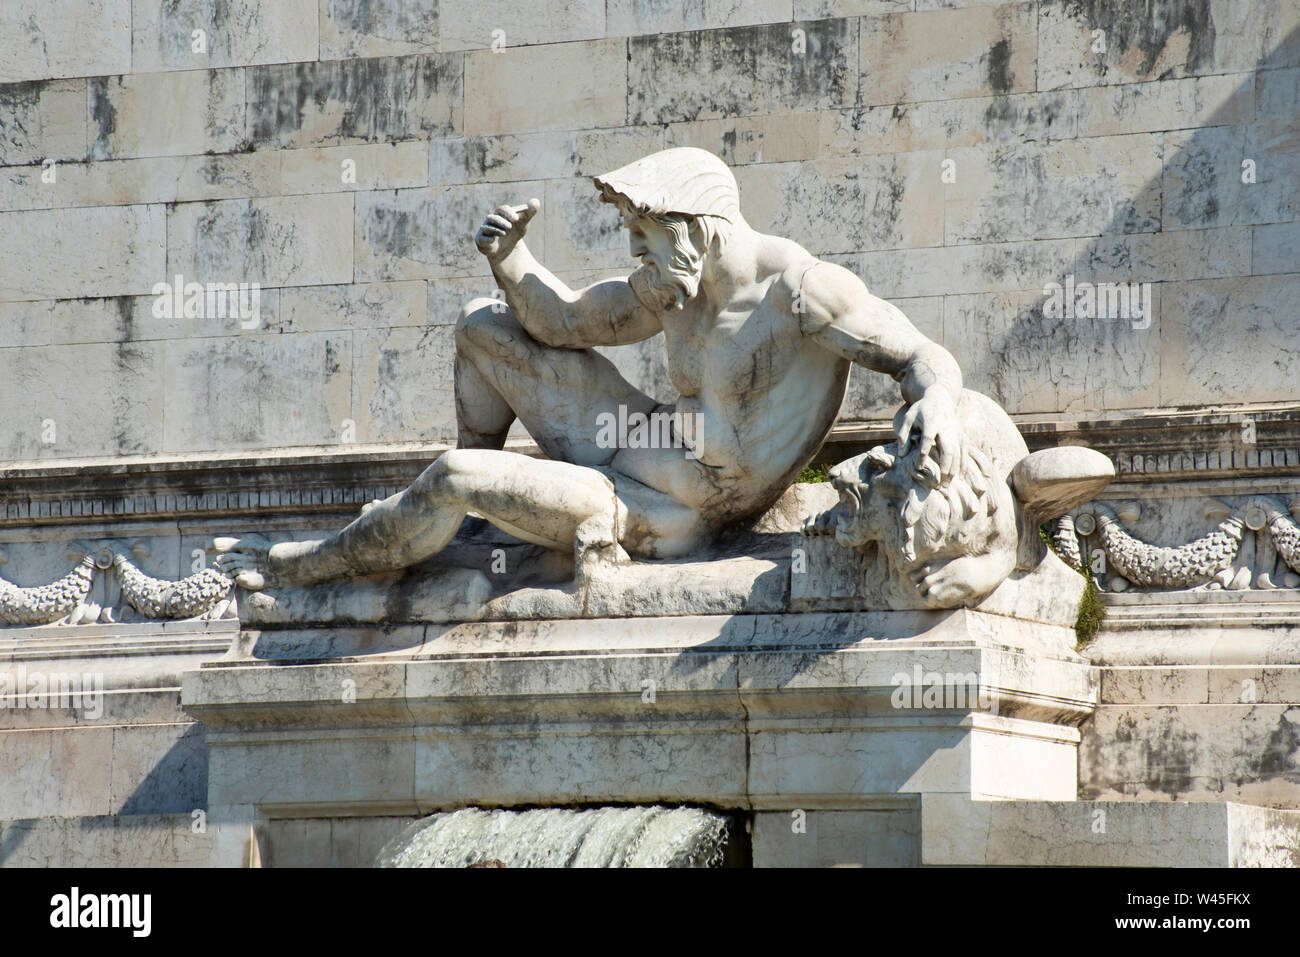 A statue of a strong reclining figure over an old building,  Florence's Accademia museum, Florence, Italy. Stock Photo